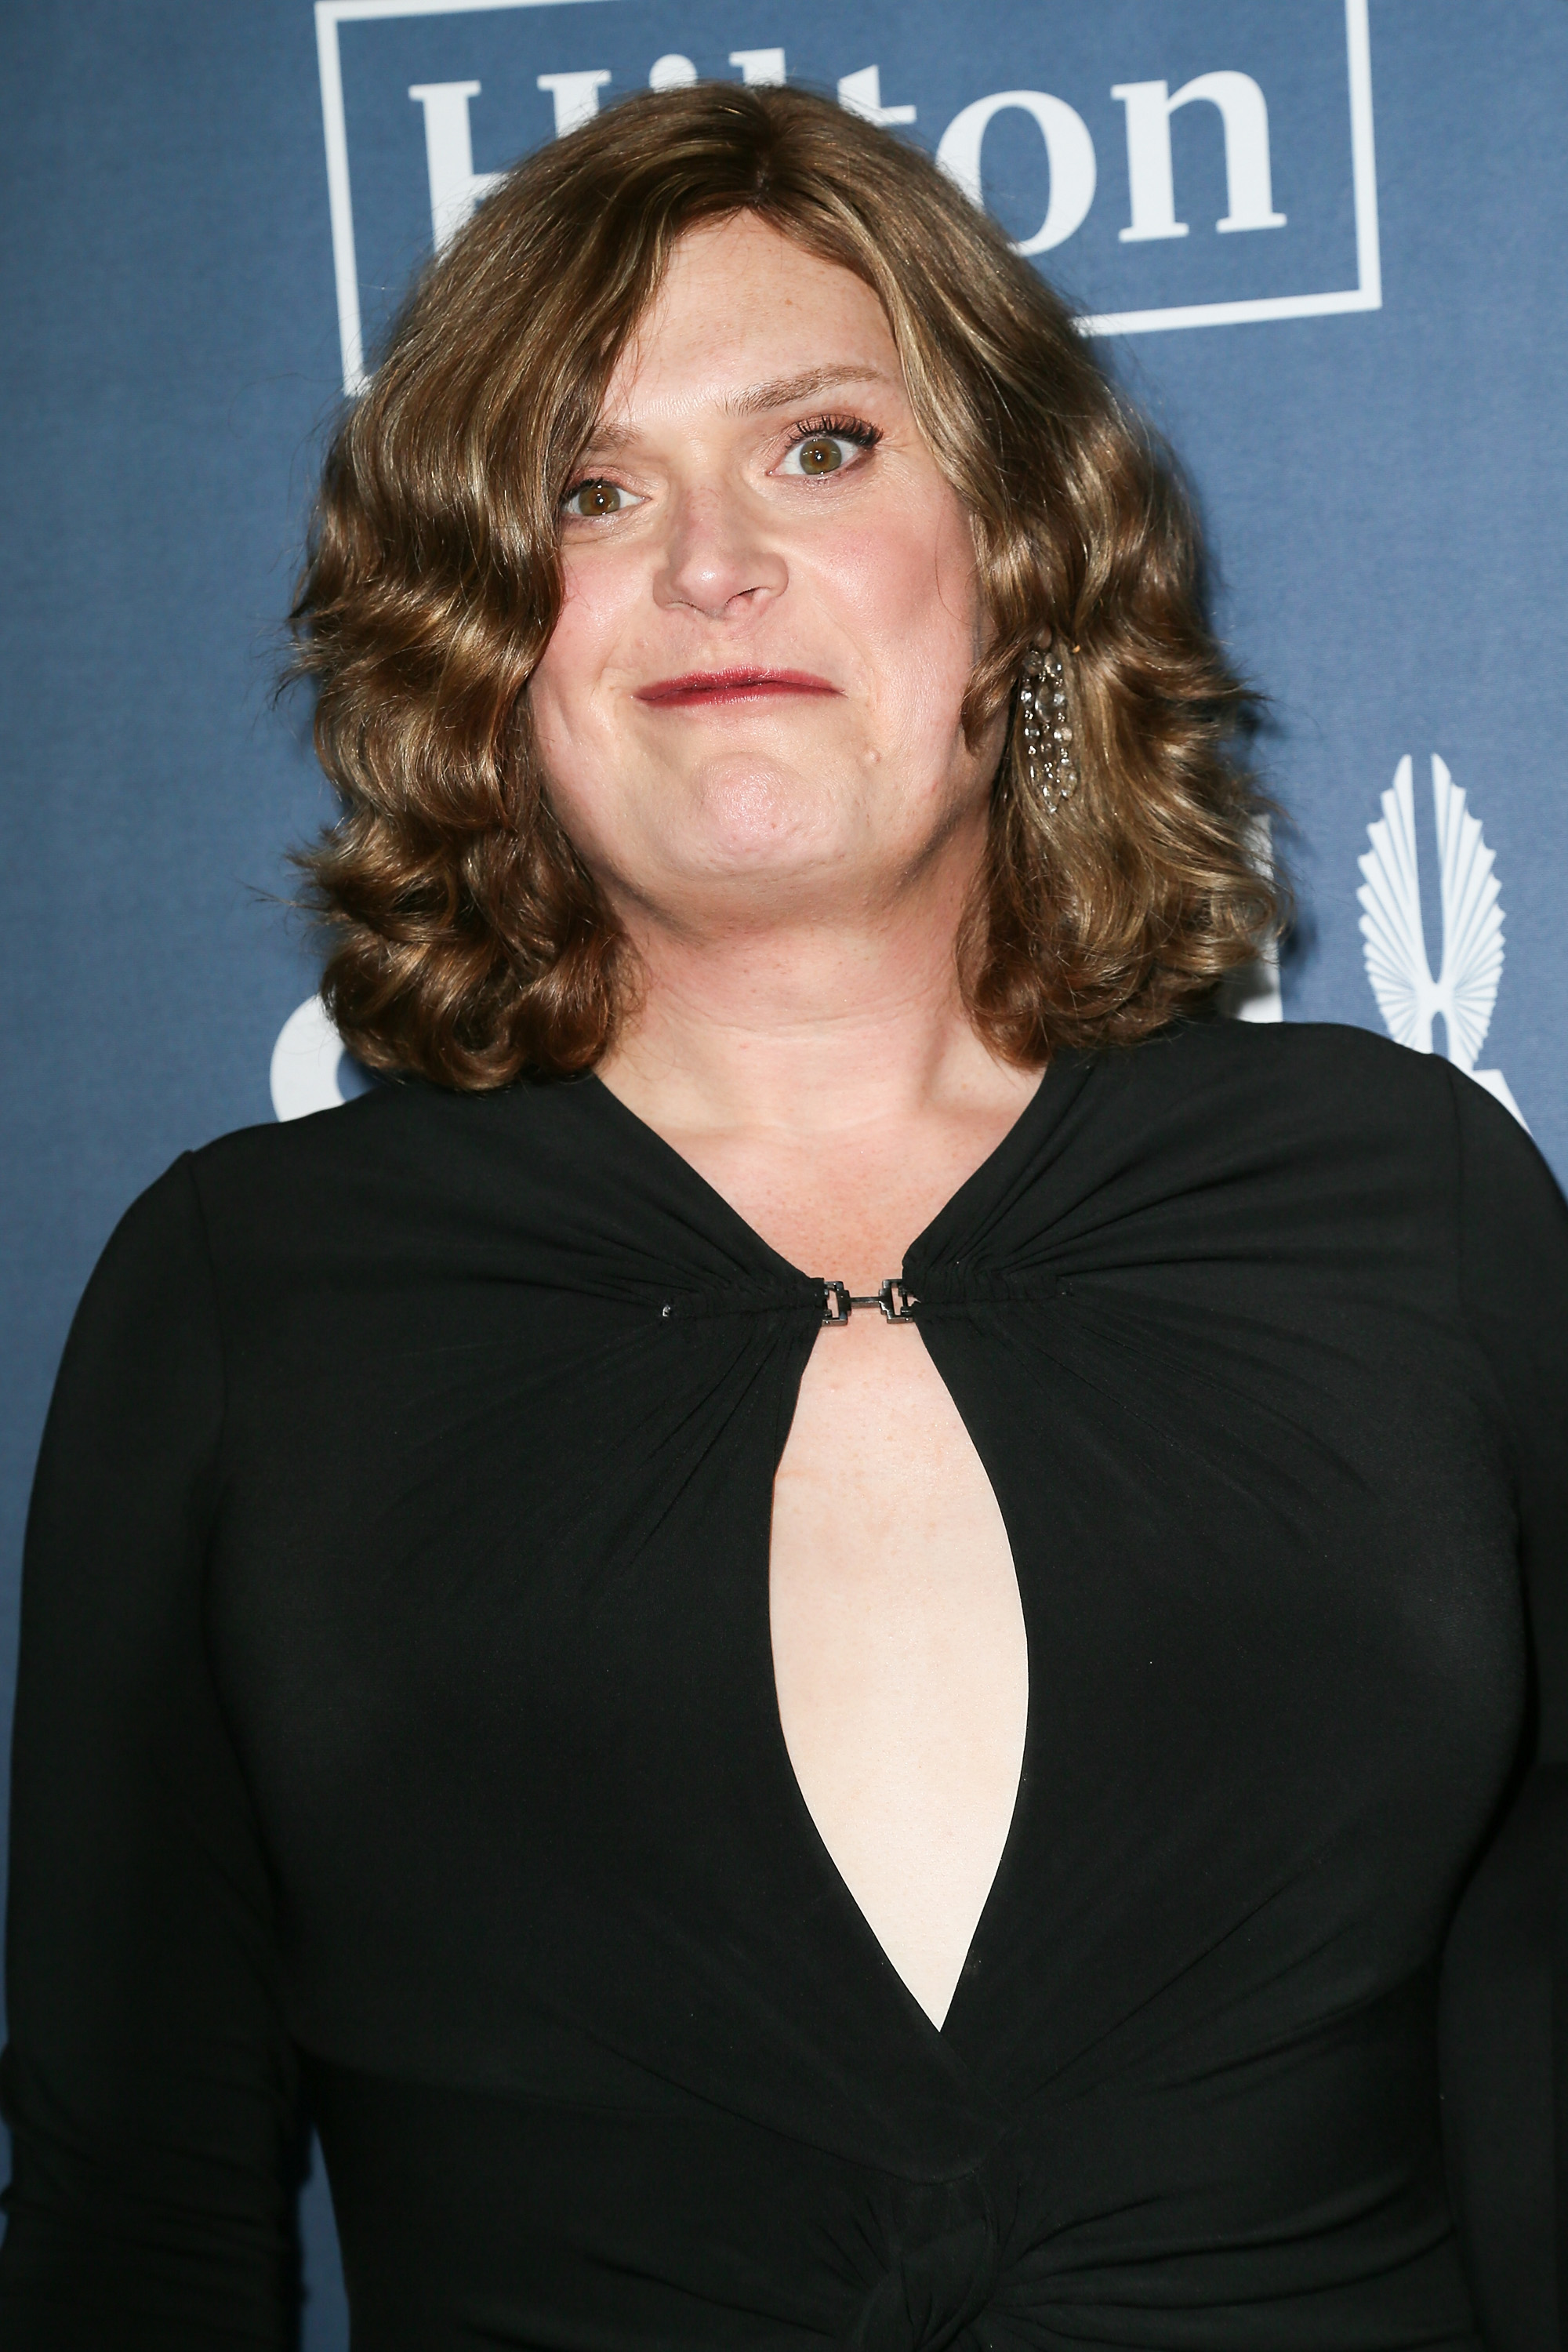 Lilly Wachowski arrives at the 27th Annual GLAAD Media Awards at The Beverly Hilton Hotel on April 2, 2016, in Beverly Hills, California. | Source: Getty Images